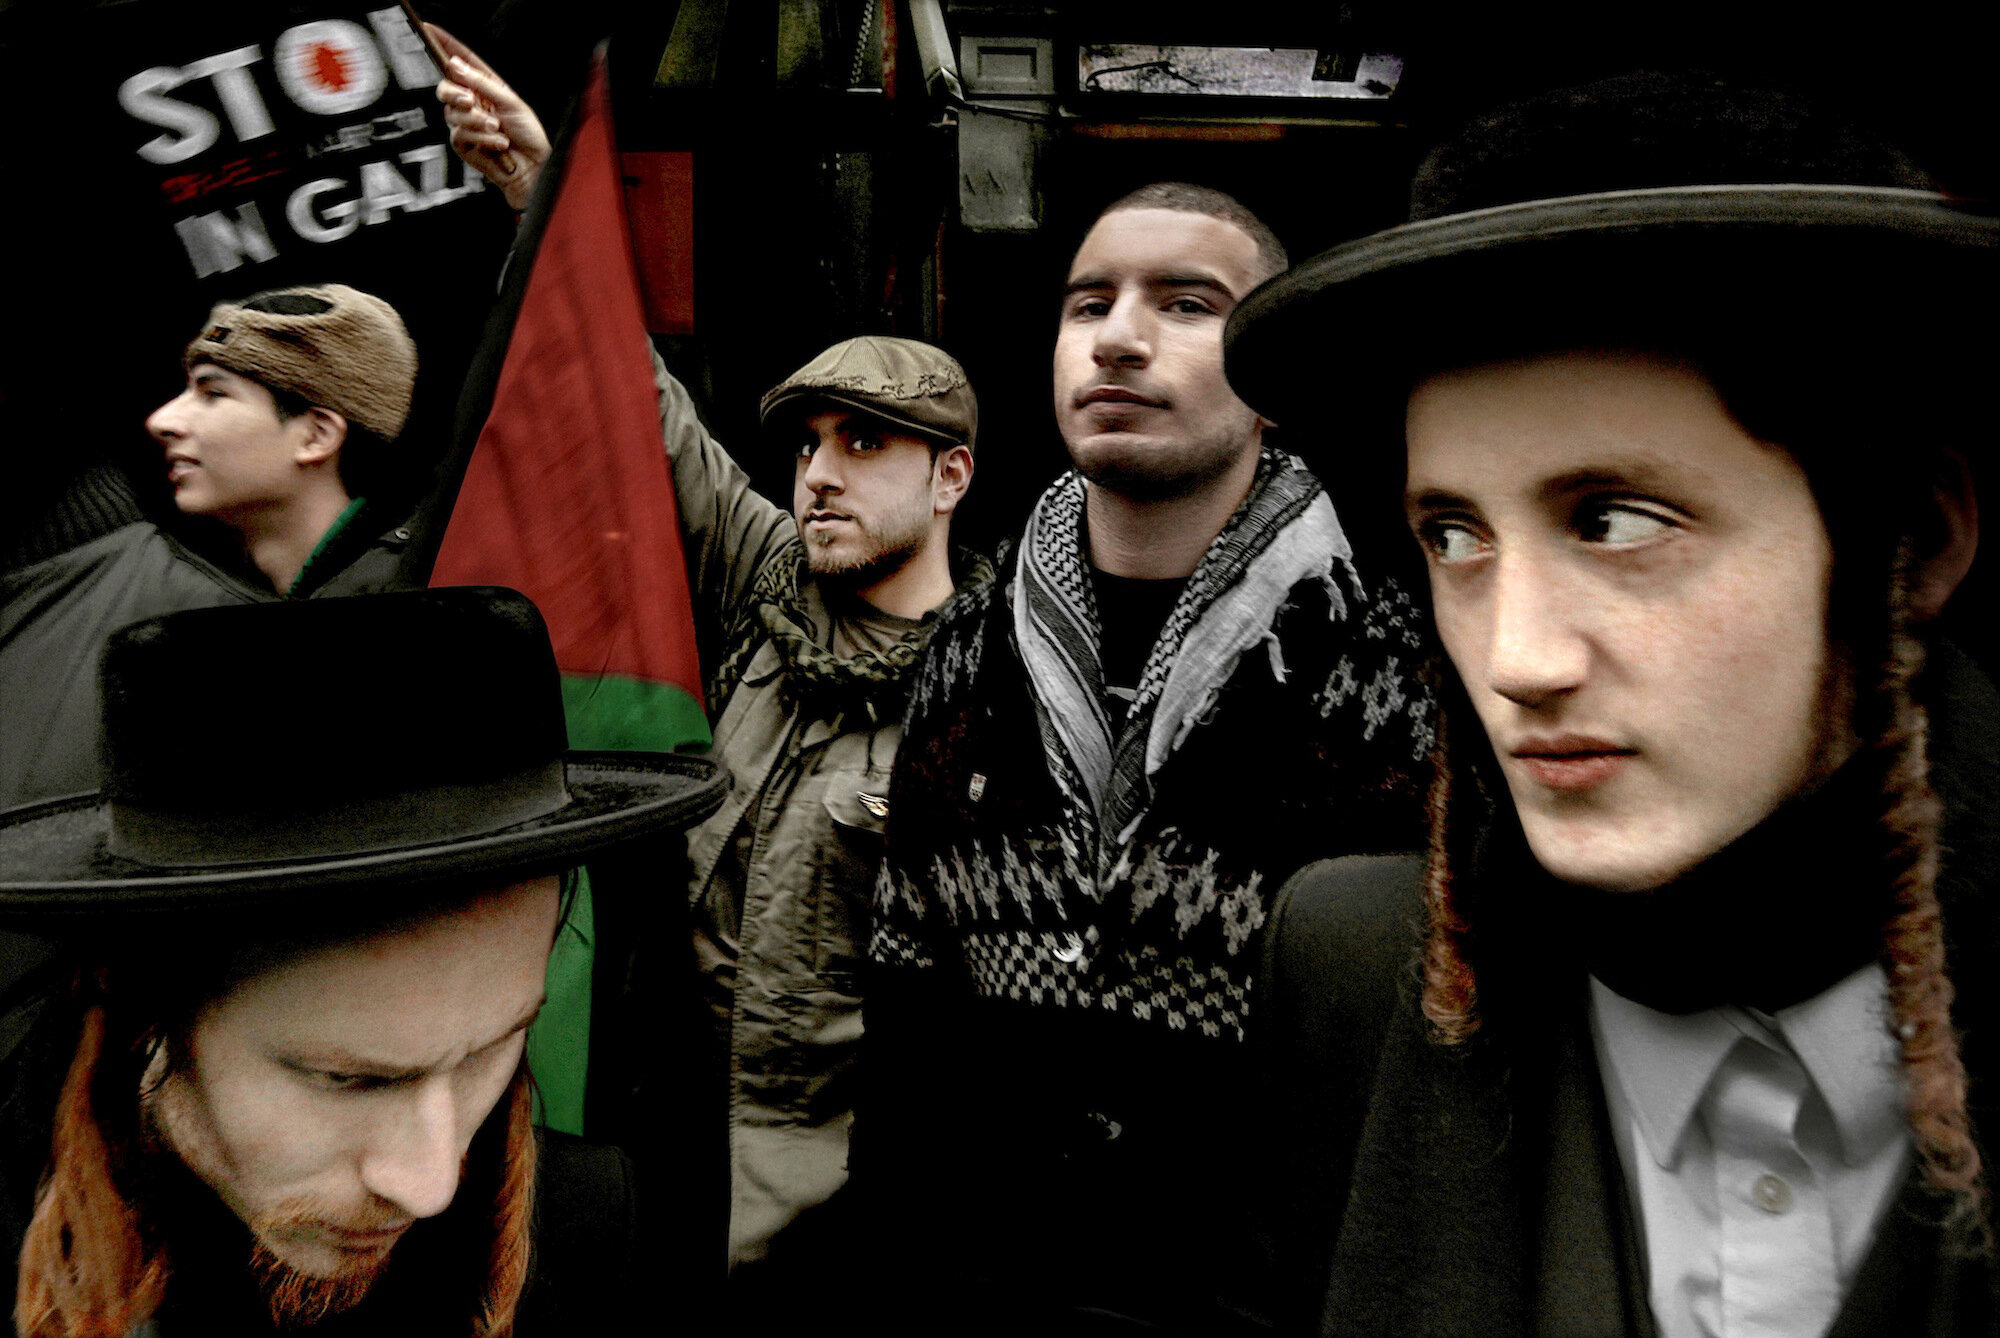   UK. London. 2011. Muslims, along-with members of Neturei-Karta, an organization of Orthodox Jews, protest outside the Israeli Embassy to mark the third anniversary of Israel’s attack on Gaza. Members of Neturei-Karta refuse to recognize the existen